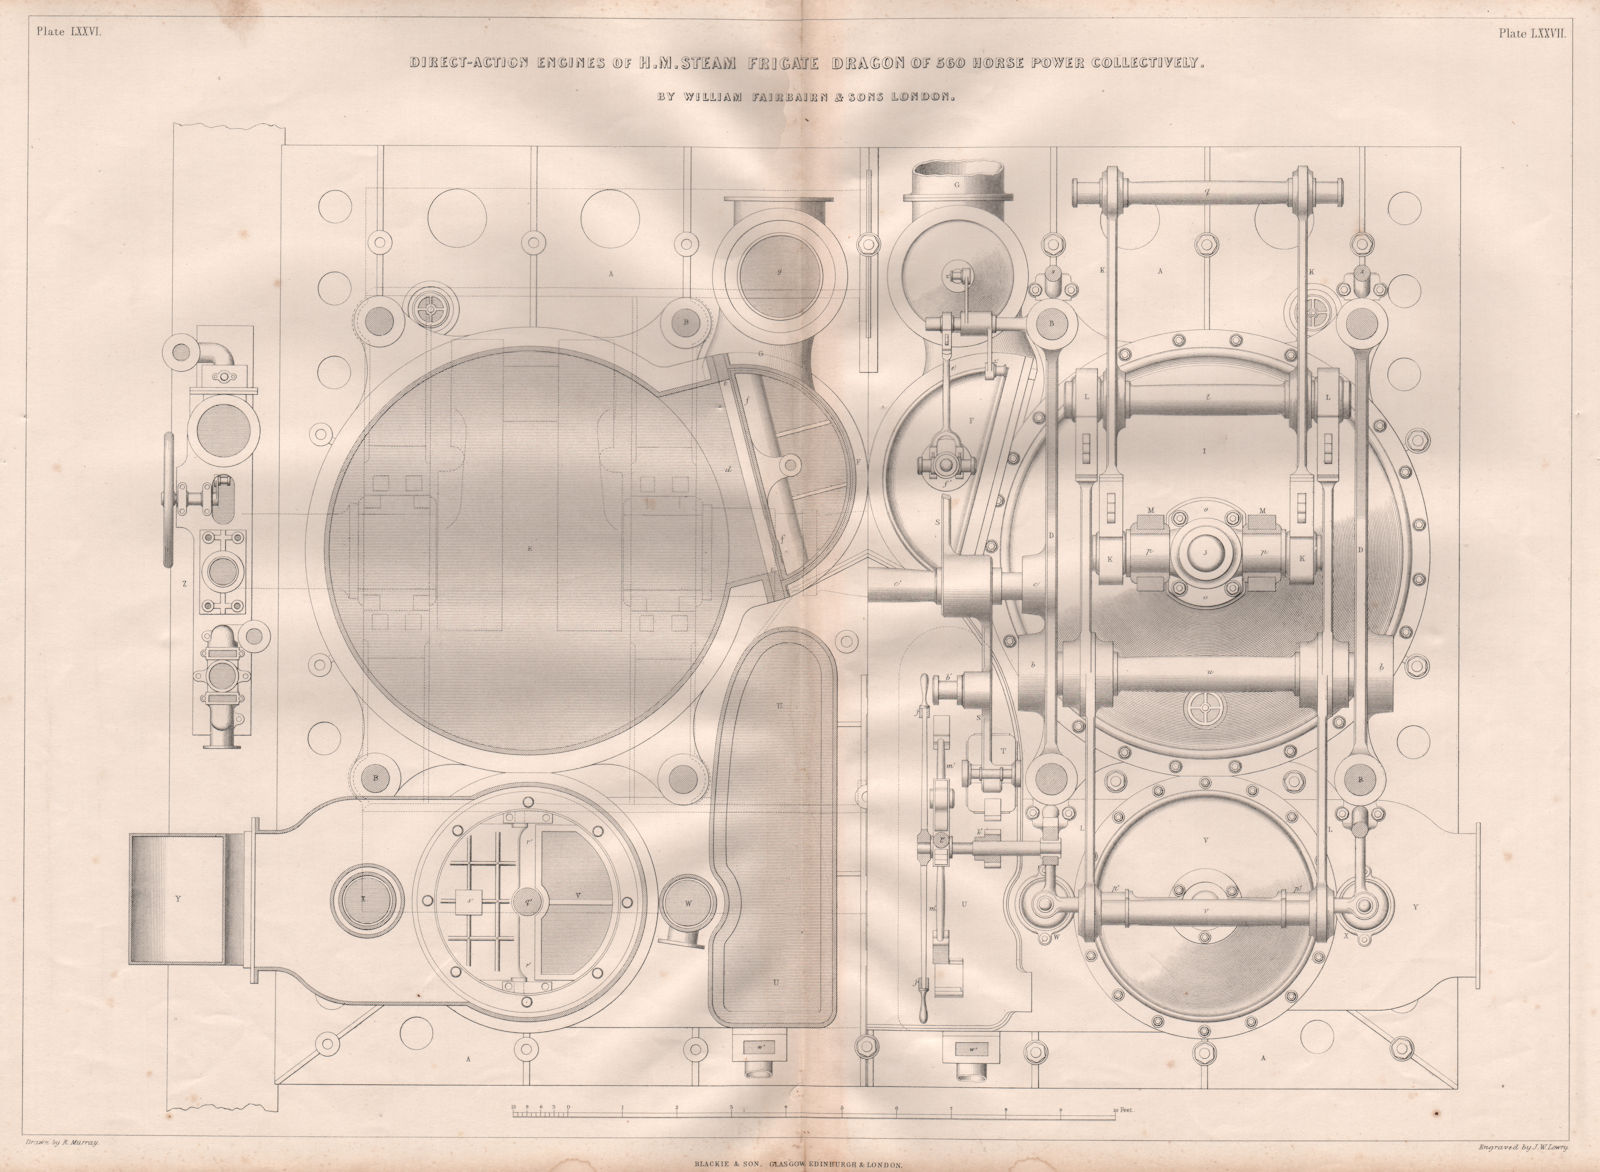 Associate Product 19C ENGINEERING DRAWING. Direct-action engines of HM Steam Frigate Dragon 1847